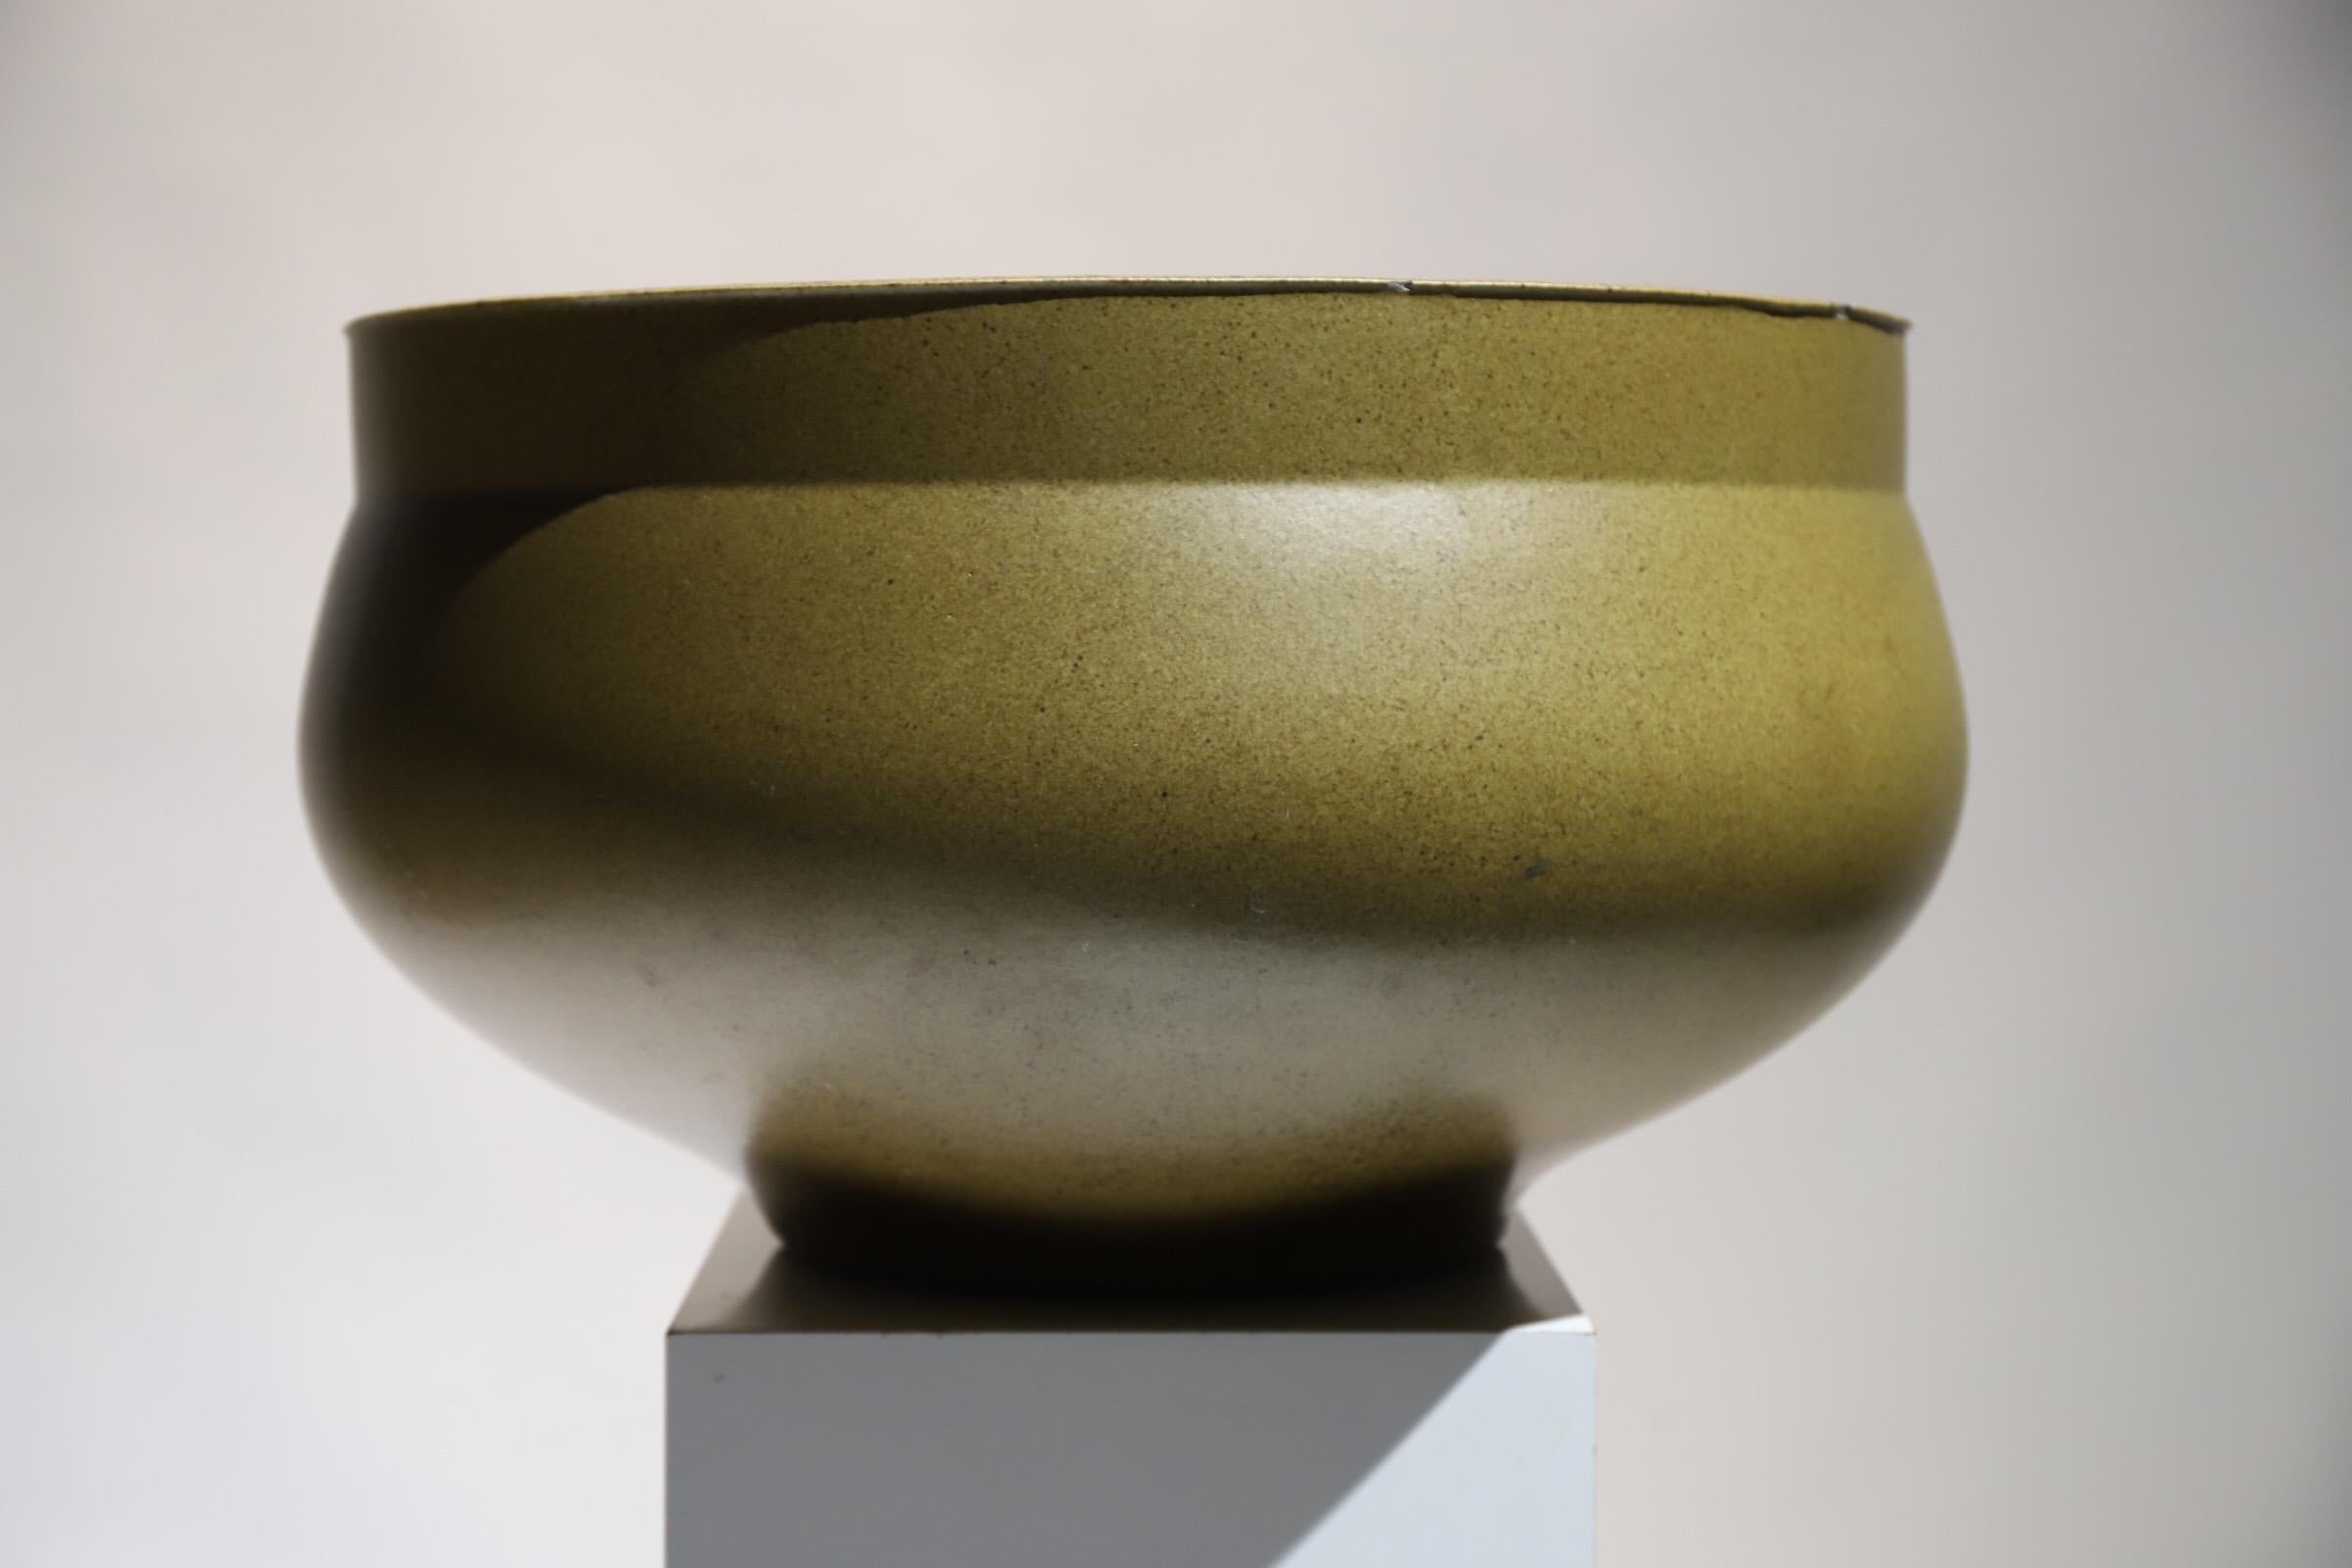 A large David Cressey glazed pot or vessel is a stunning work of art that combines form, texture, and color in a captivating way. Known for his ceramic creations, David Cressey has a distinct style that is both modern and organic.

This particular